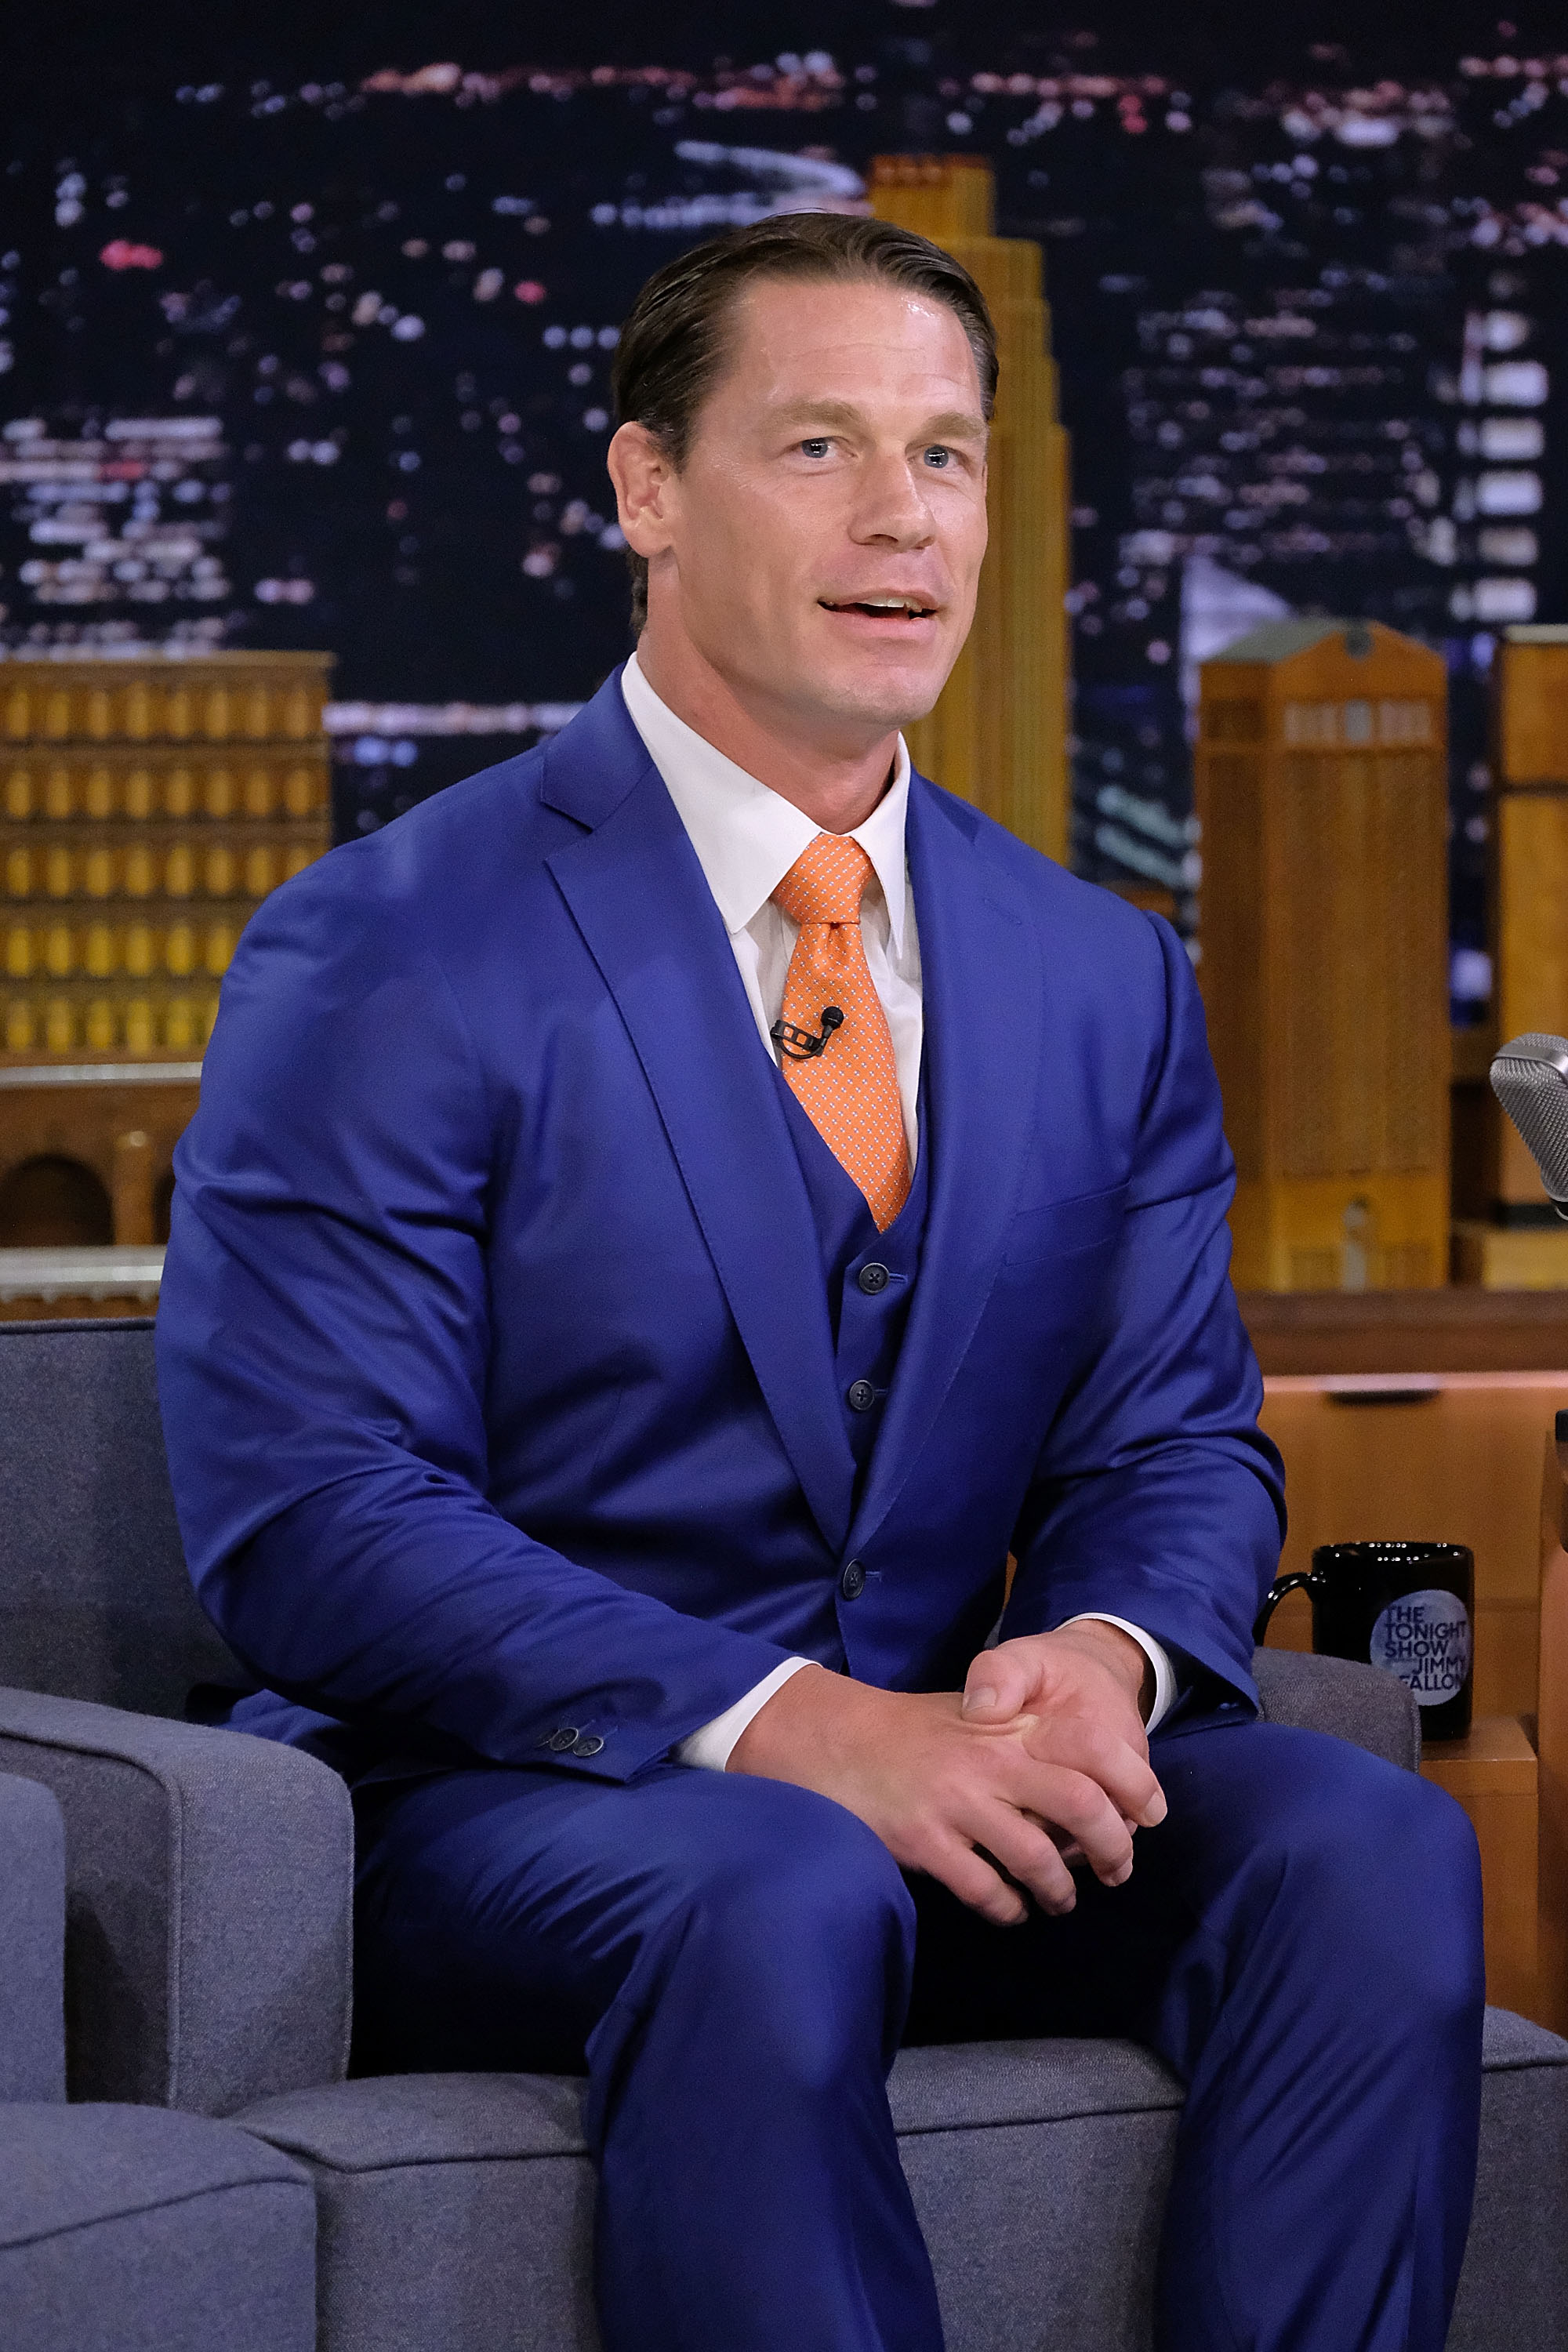 John Cena visits "The Tonight Show Starring Jimmy Fallon"at Rockefeller Center on October 9, 2018, in New York City. | Source: Getty Images.